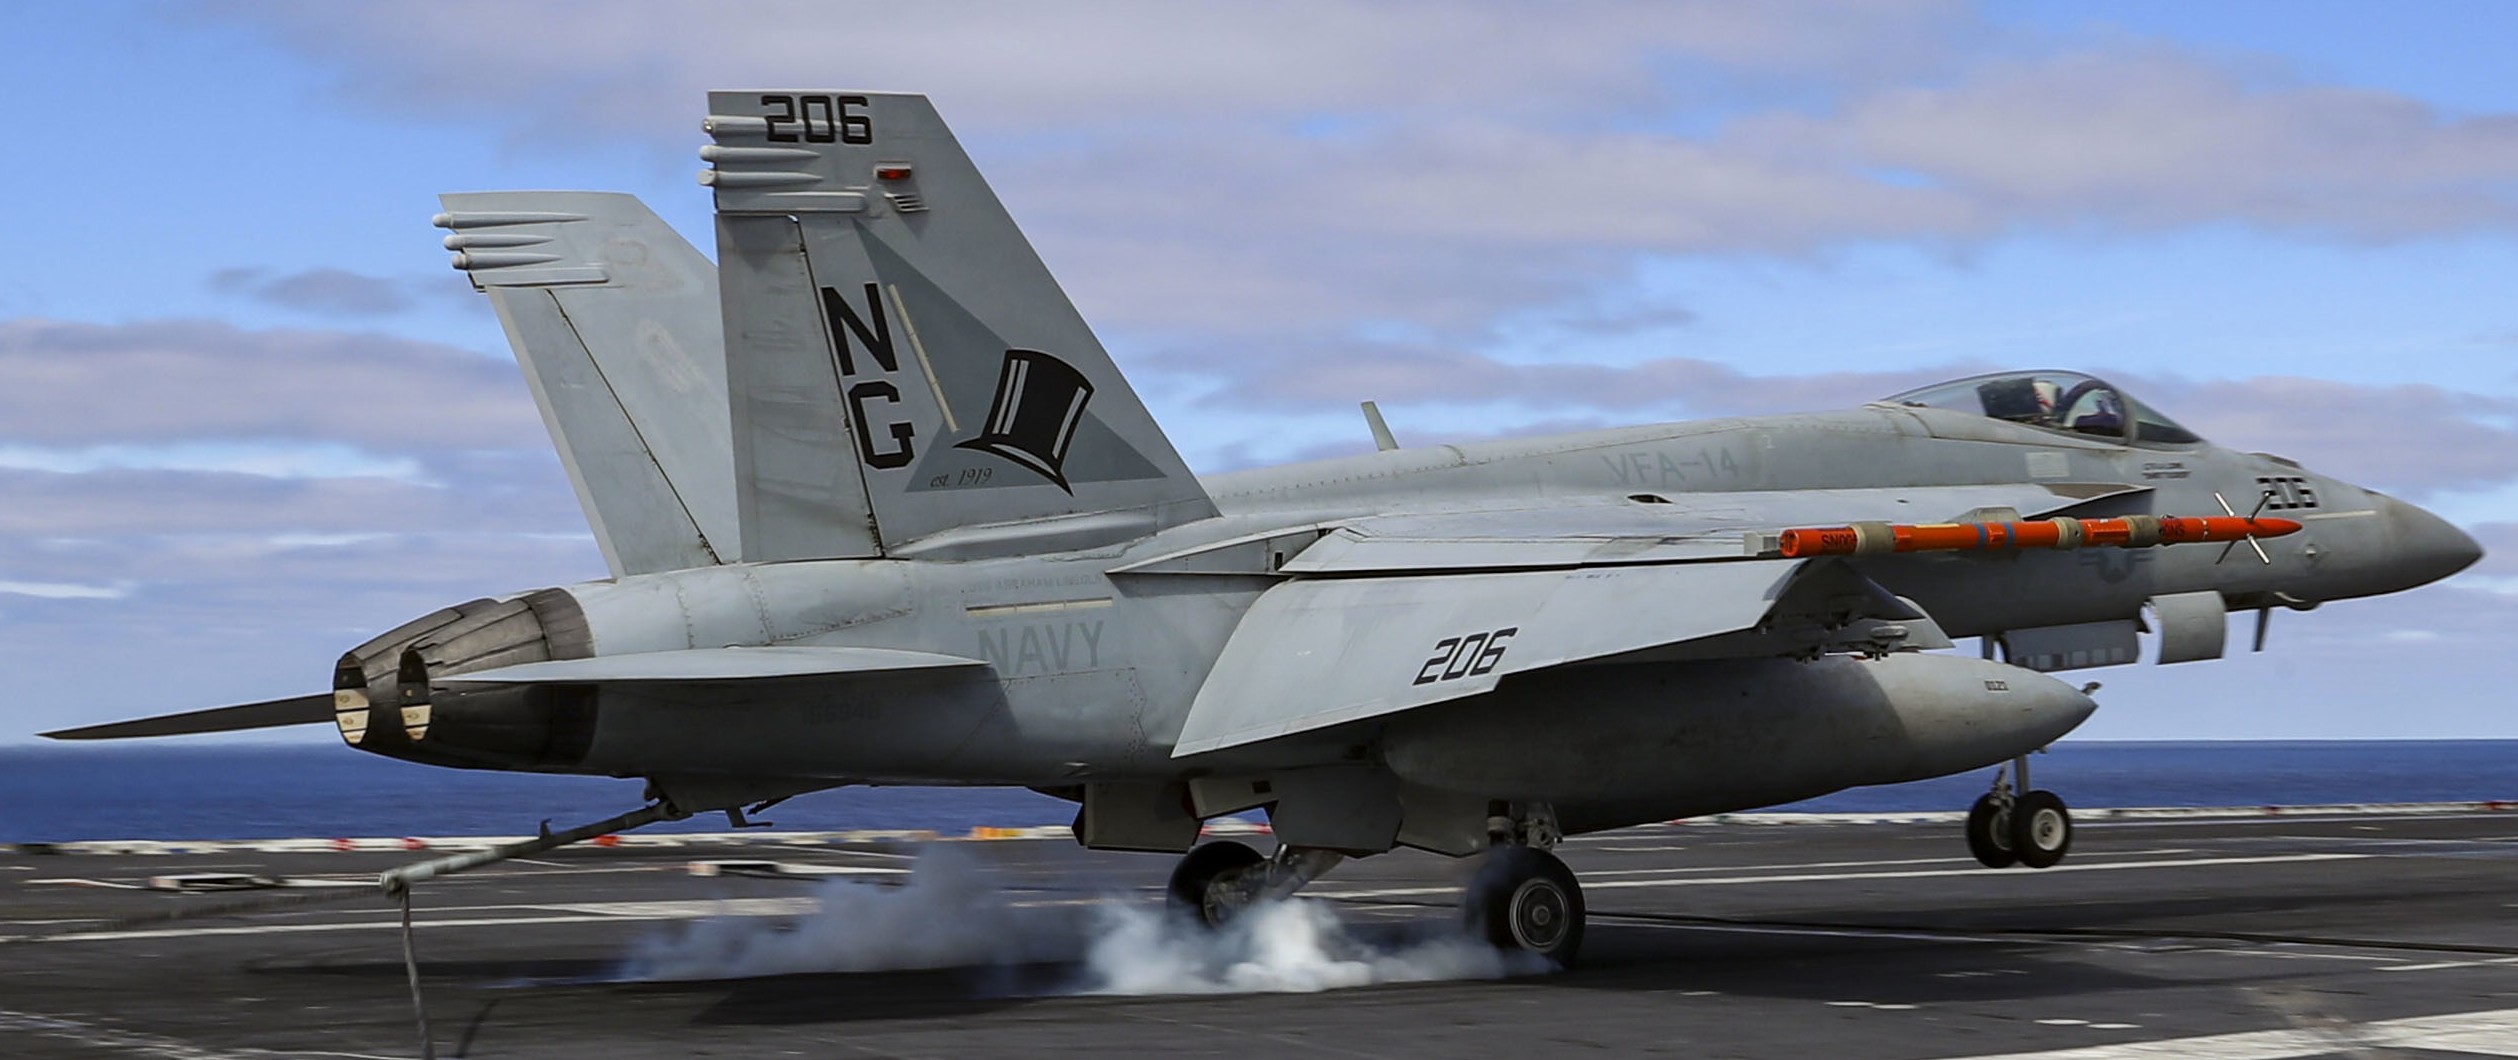 vfa-14 tophatters strike fighter squadron f/a-18e super hornet cvn-72 uss abraham lincoln cvw-9 us navy 49